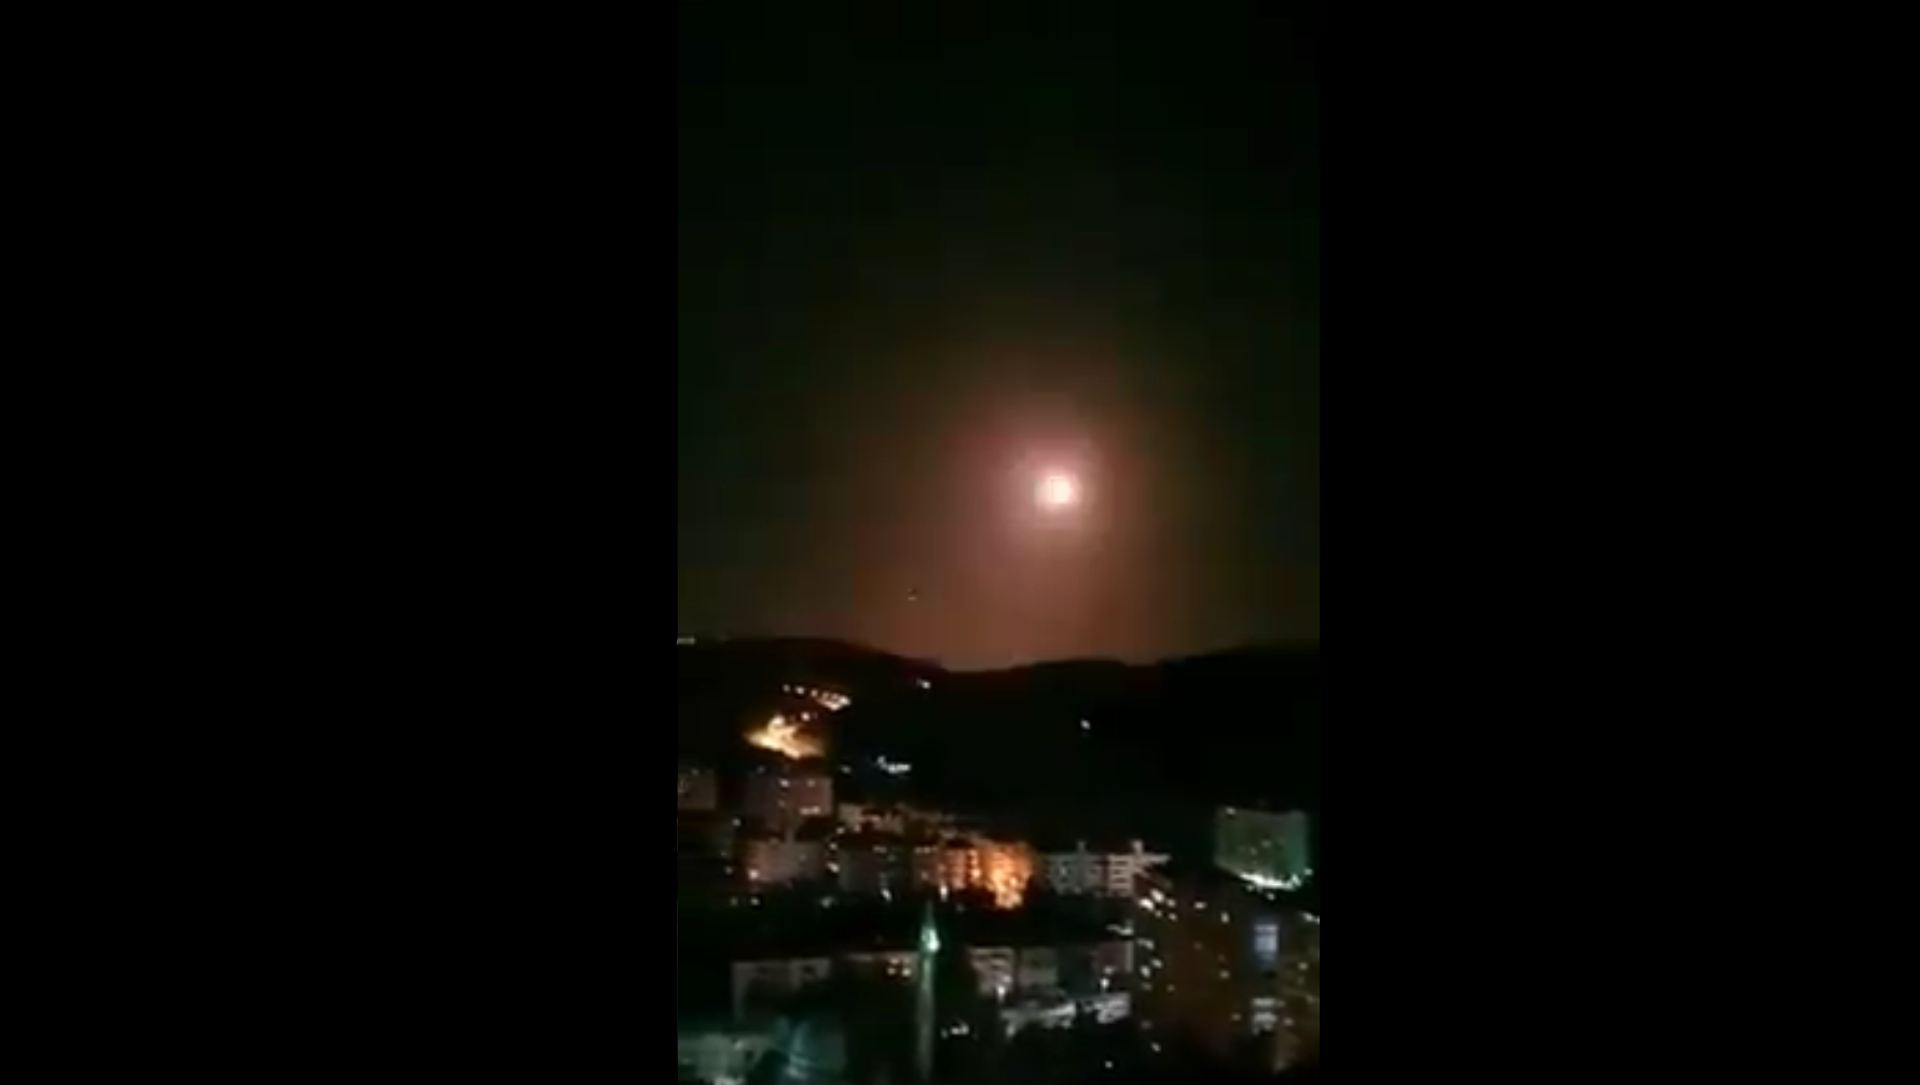 Video of Syrian air defenses engaging Israeli missiles south of Damascus this evening - Sputnik International, 1920, 16.03.2021